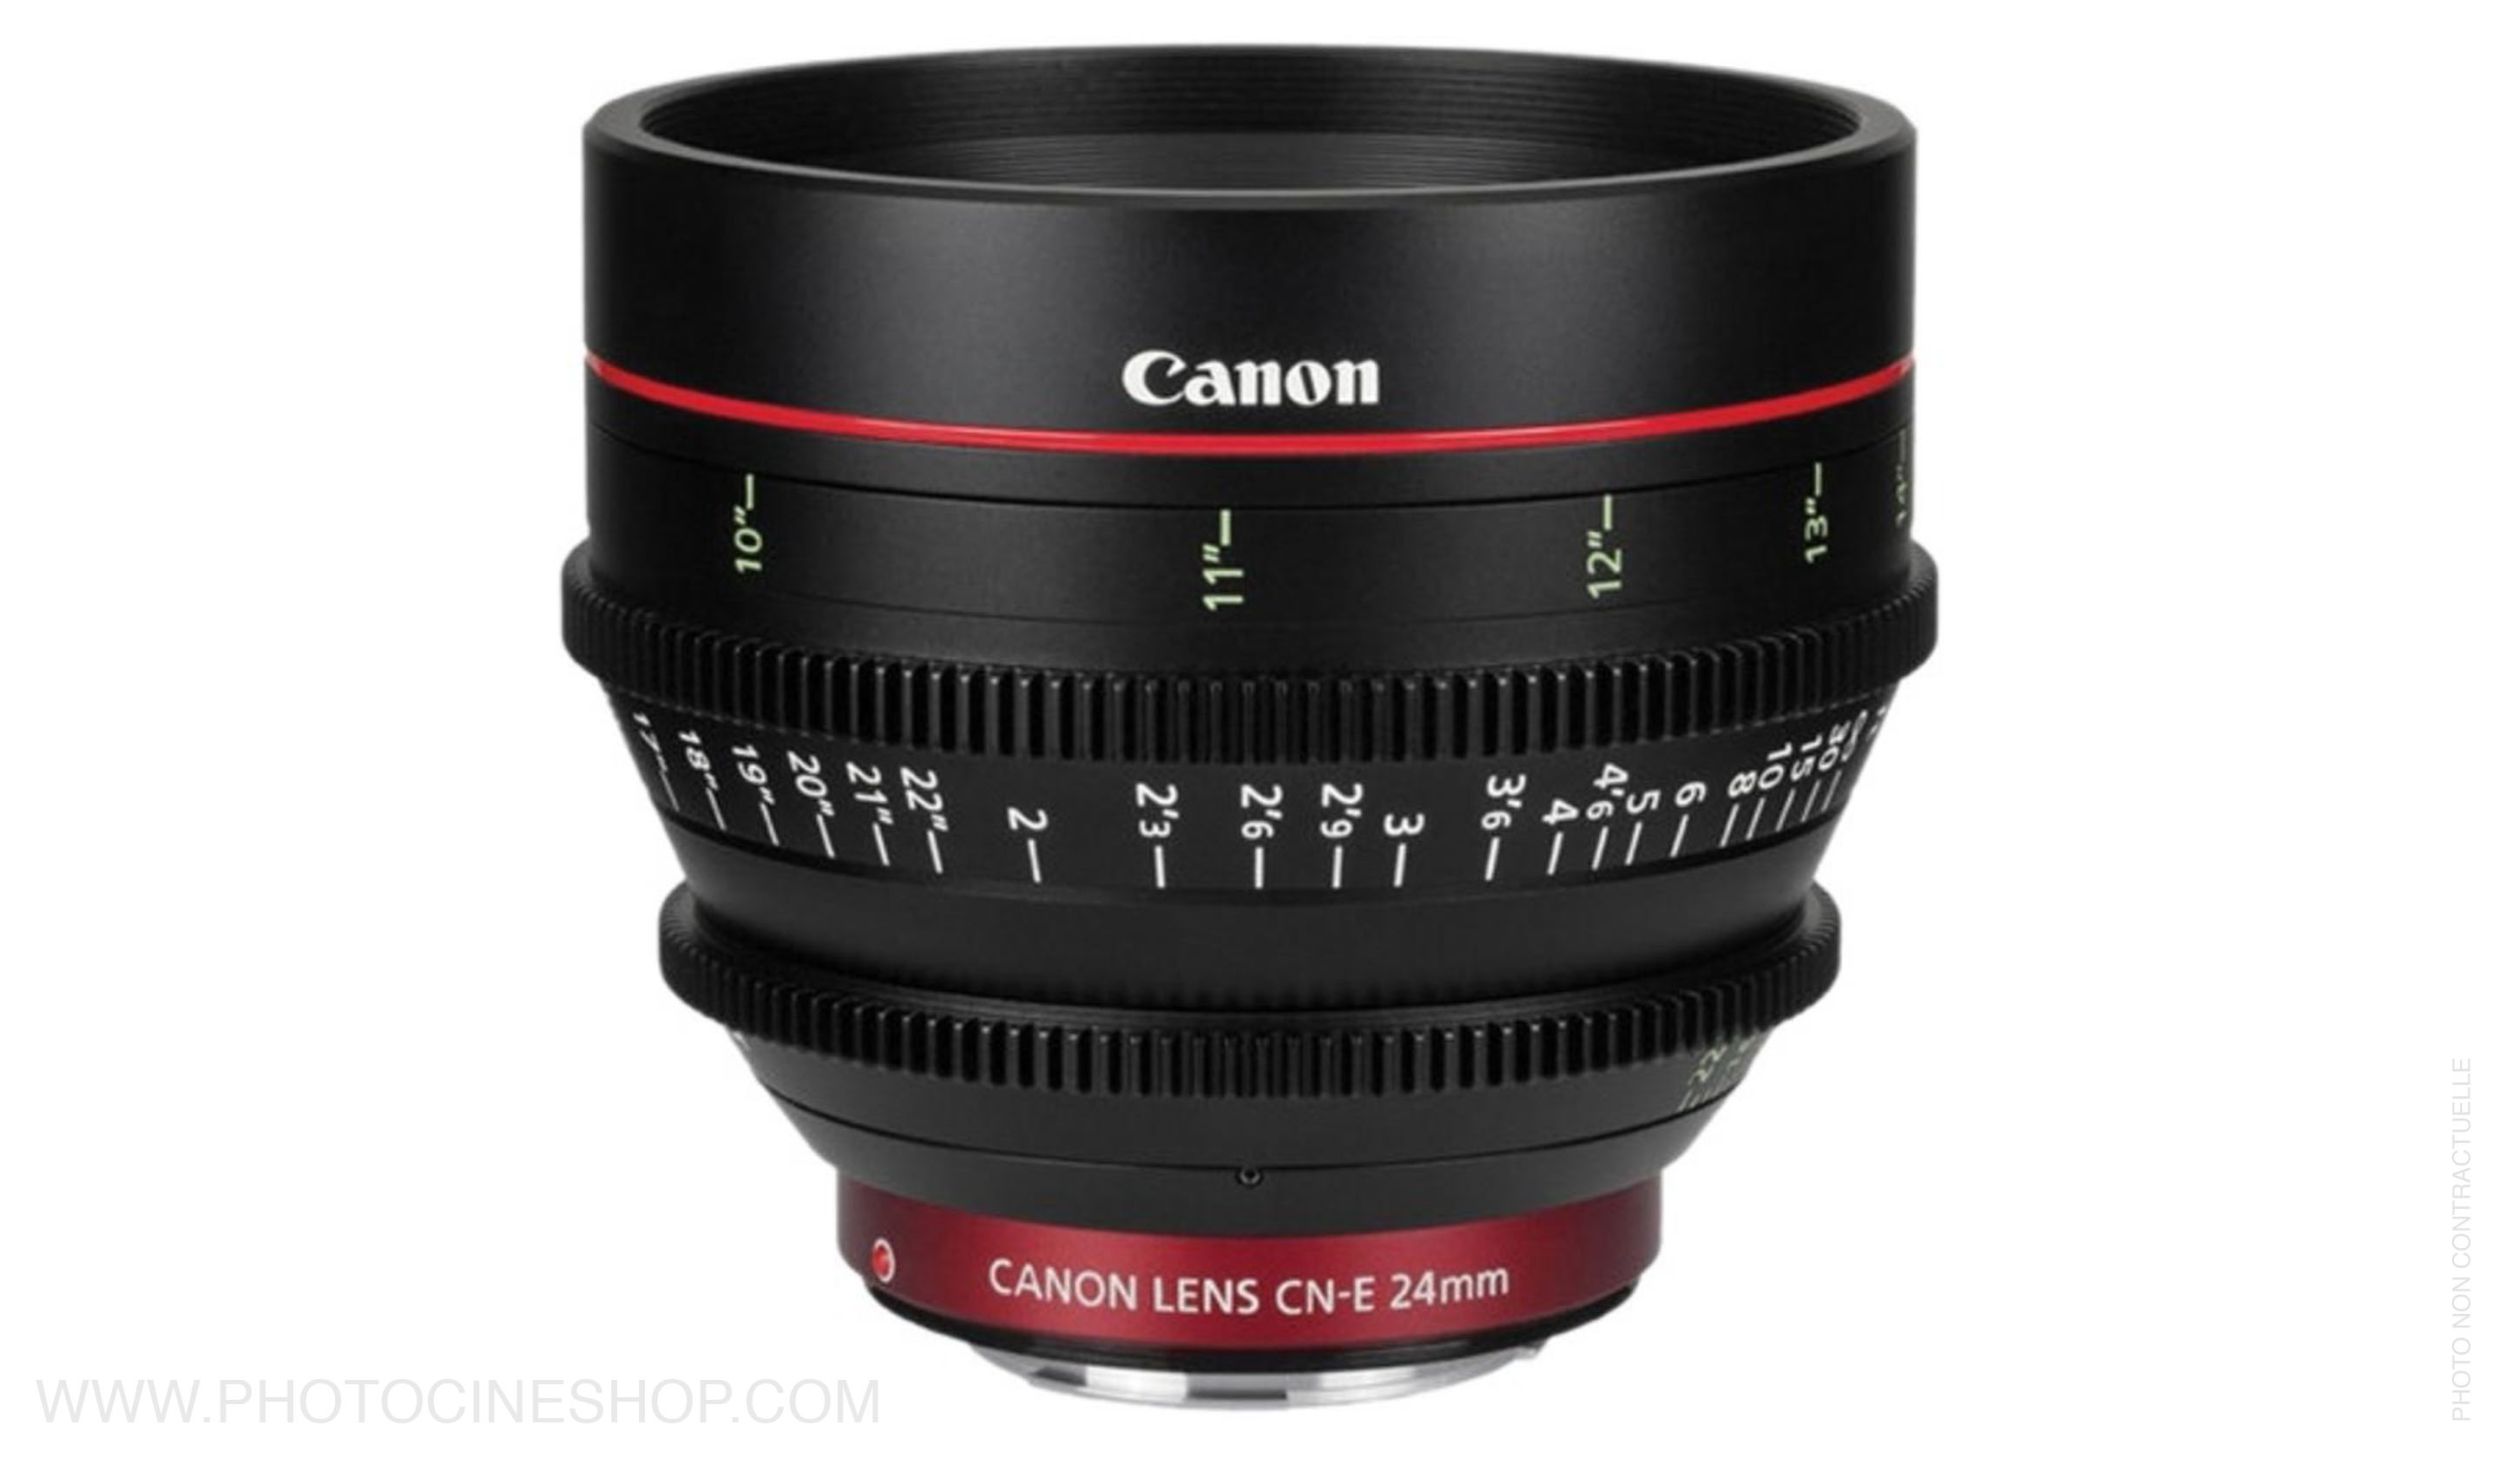 CANON - CN-E 24mm T1.5 EF (meters)